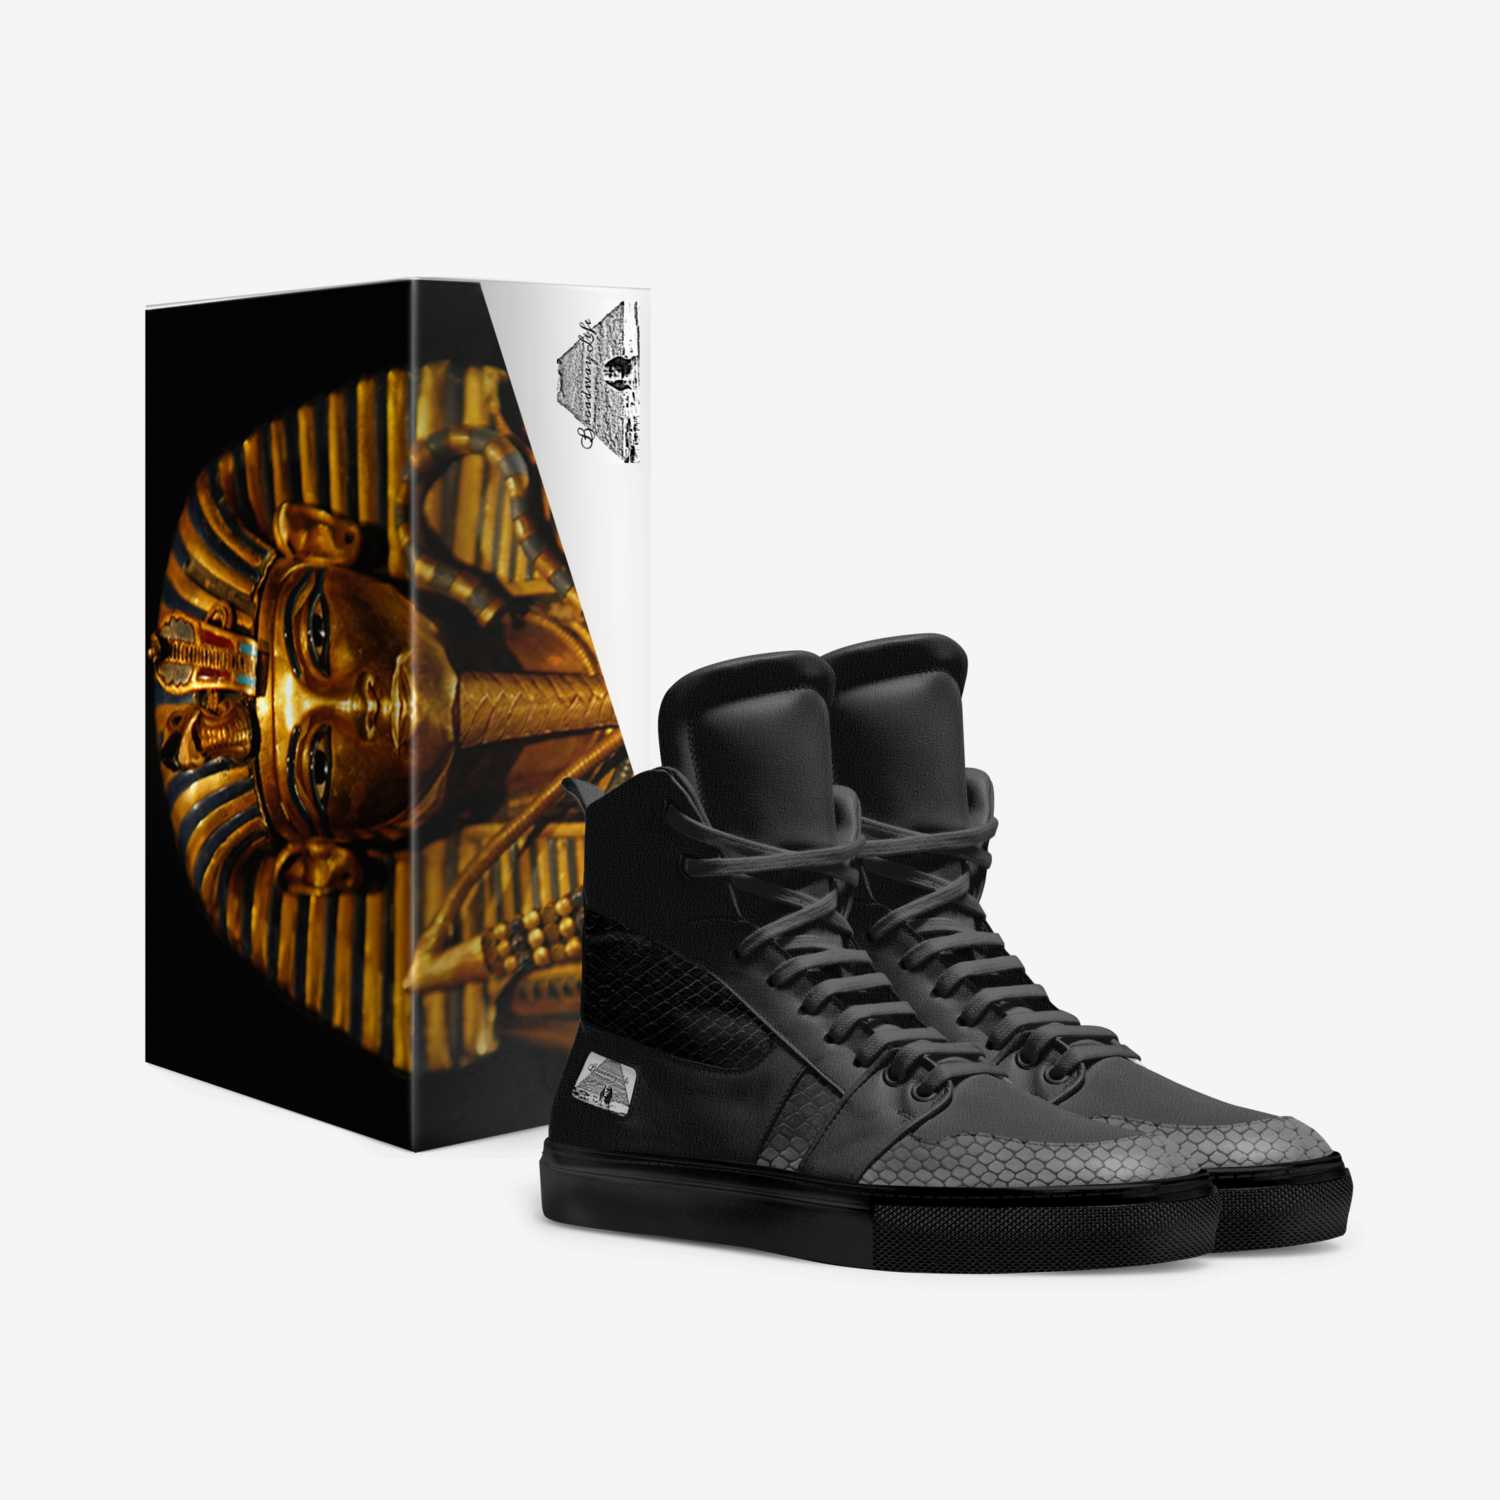 Blaq on Blaq 2 custom made in Italy shoes by Corey Broadway | Box view